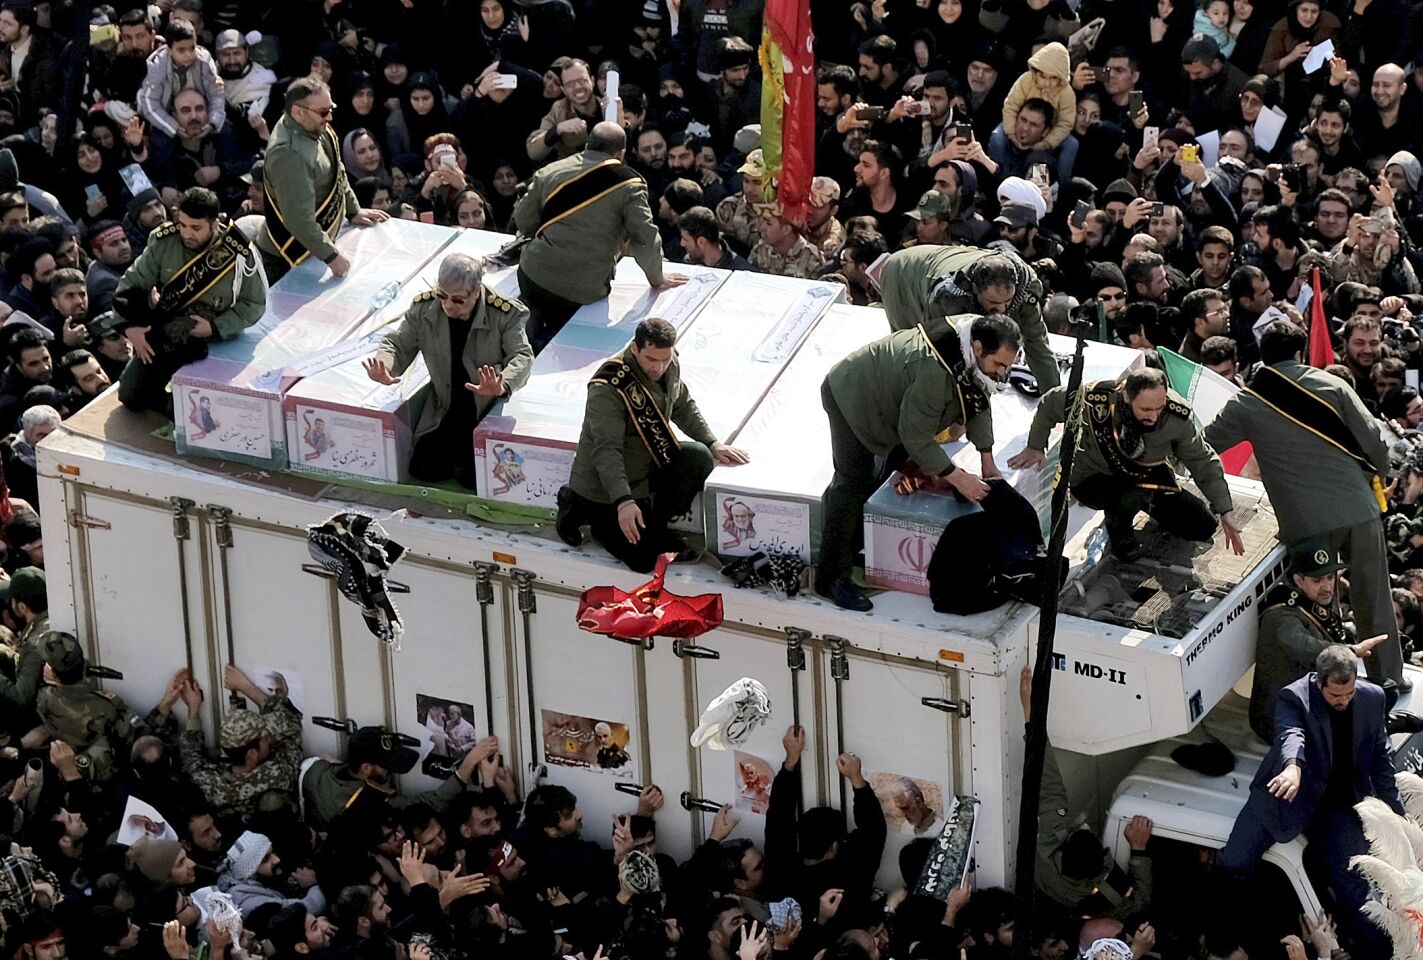 The coffins of Gen. Qassem Suleimani and others who were killed in Iraq by a U.S. drone strike are carried on a truck surrounded by mourners Jan. 6 in Tehran.